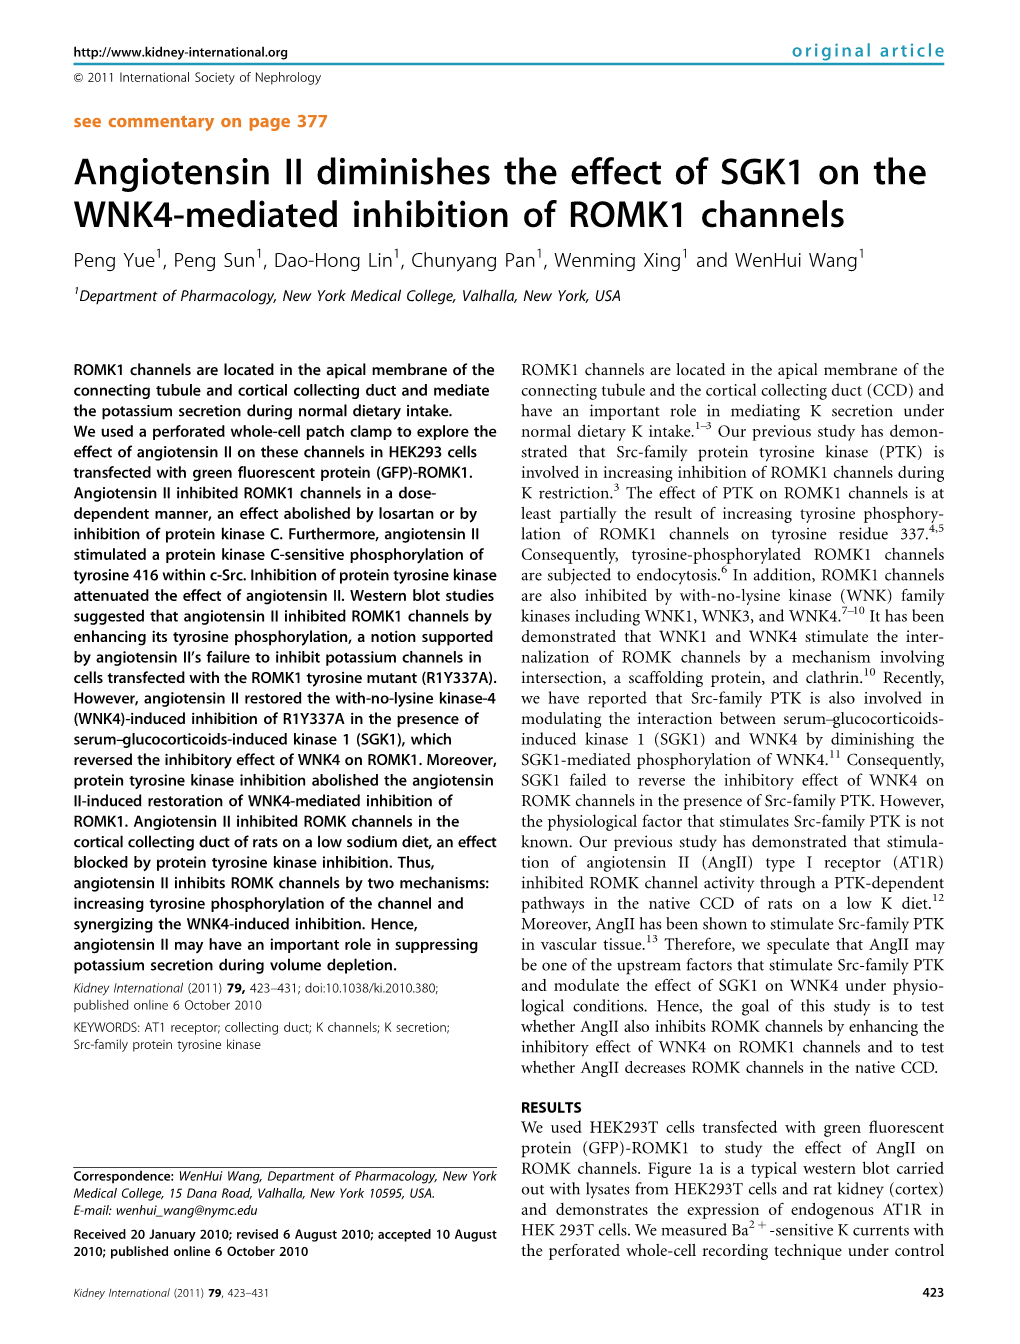 Angiotensin II Diminishes the Effect of SGK1 on the WNK4-Mediated Inhibition of ROMK1 Channels